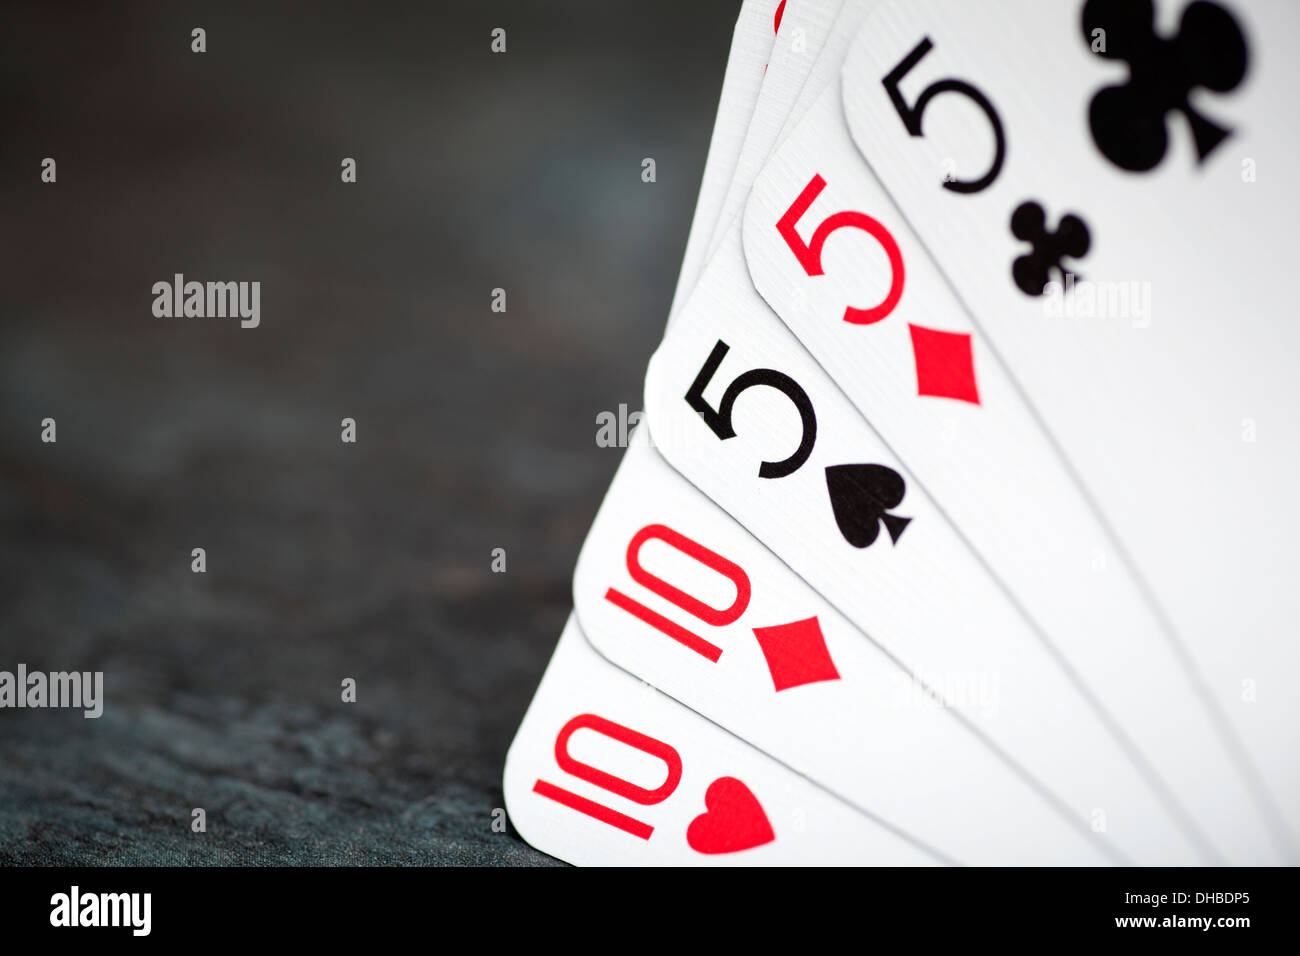 Full House poker hand with 10's and 5's Stock Photo